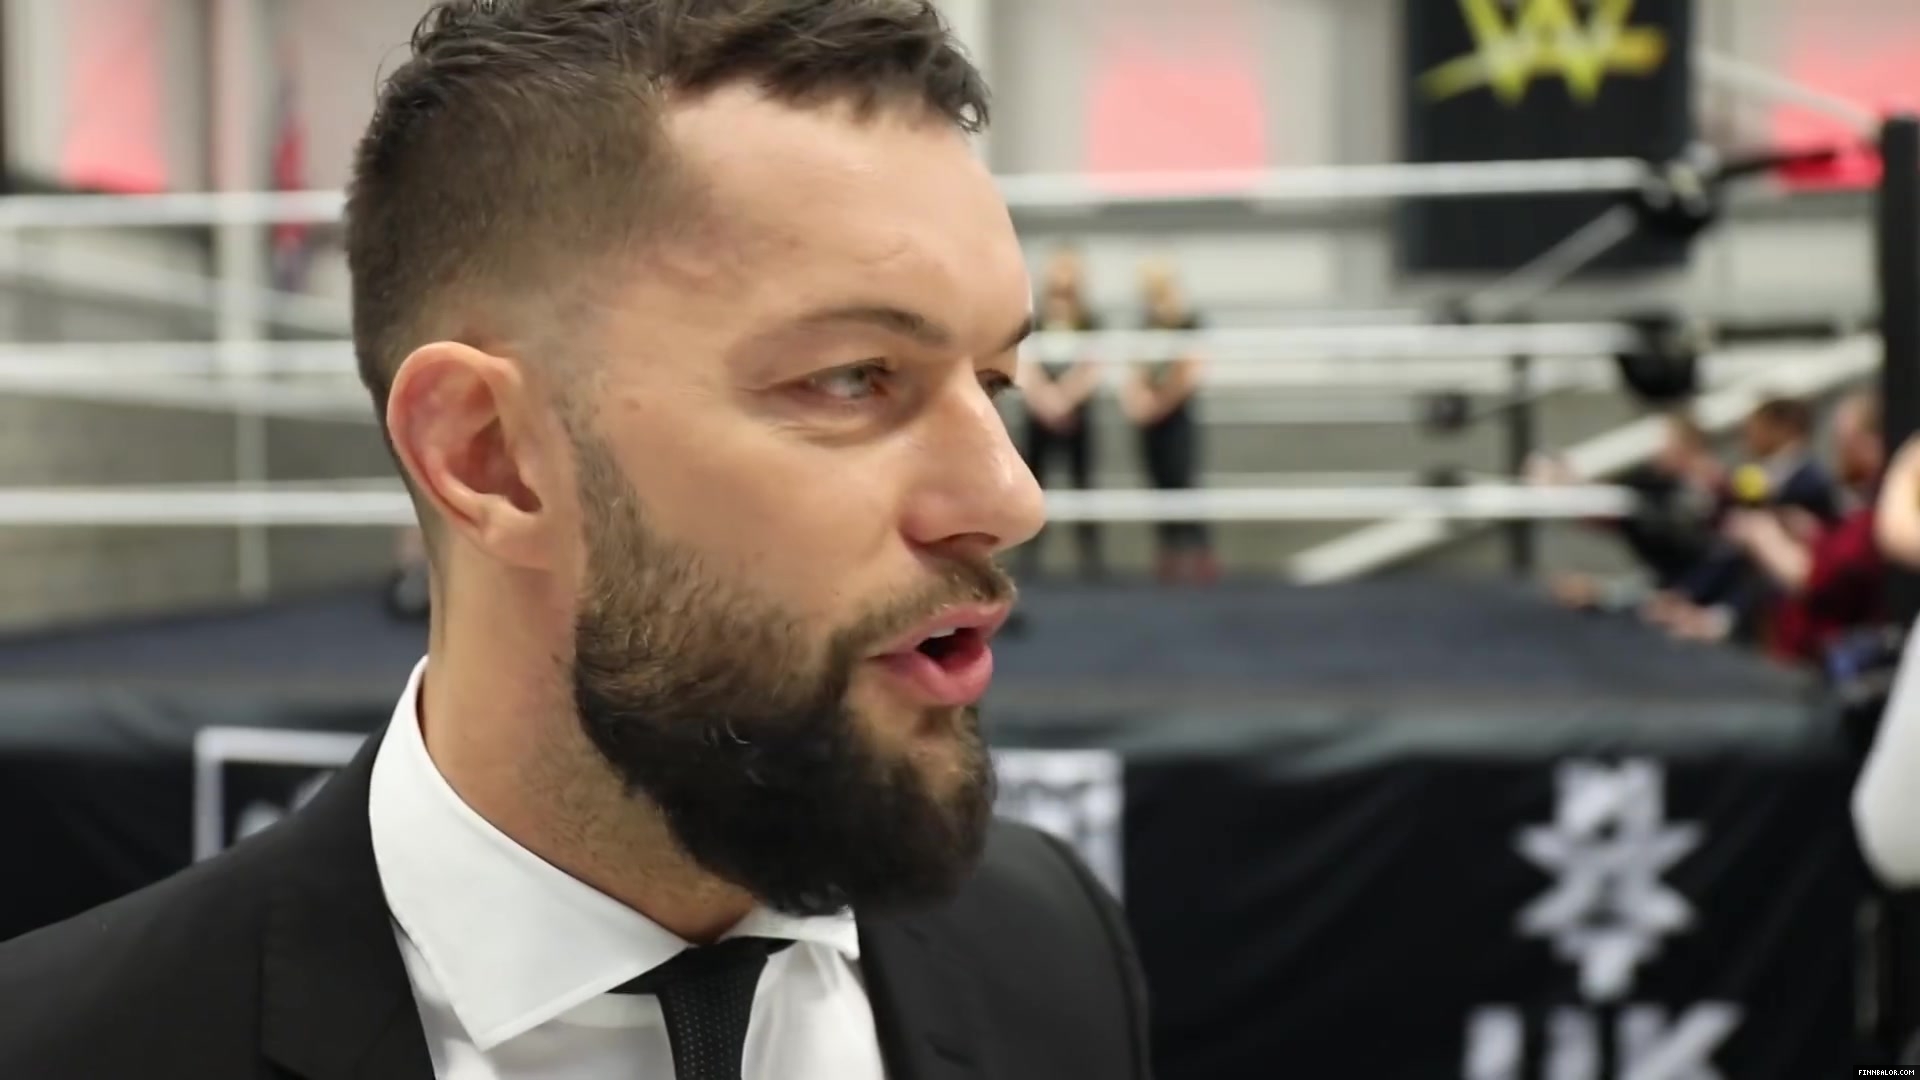 WWE_Superstar_FINN_BALOR_joins_MOUSTACHE_MOUNTAIN_at_the_opening_of_the_NXT_UK_PC_060.jpg